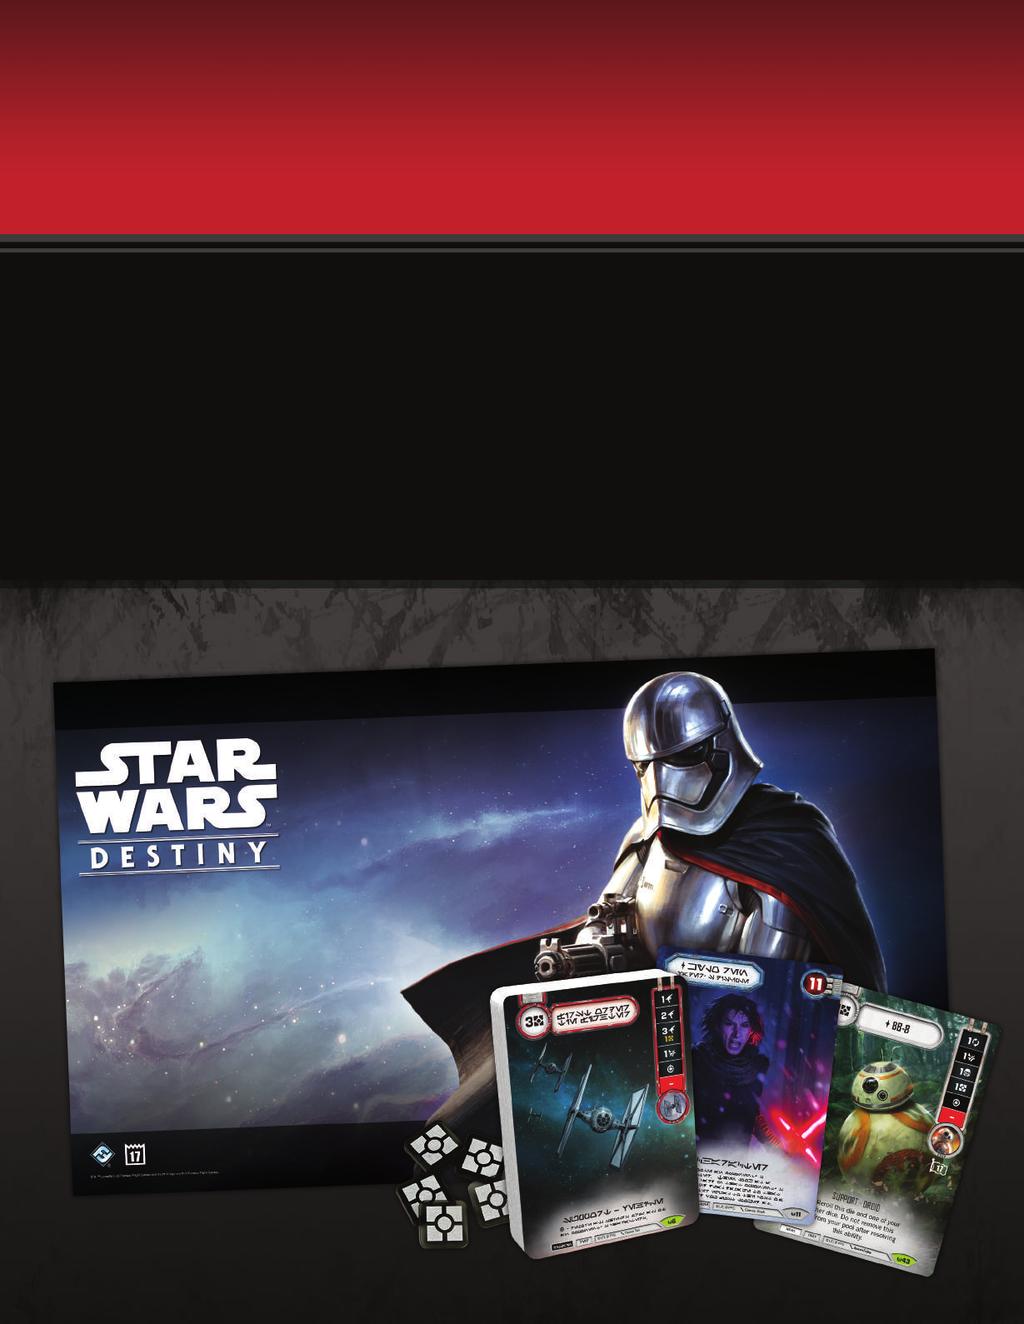 ORGANIZED PLAY Star Wars: Destiny will also receive the full support of our Organized Play team.